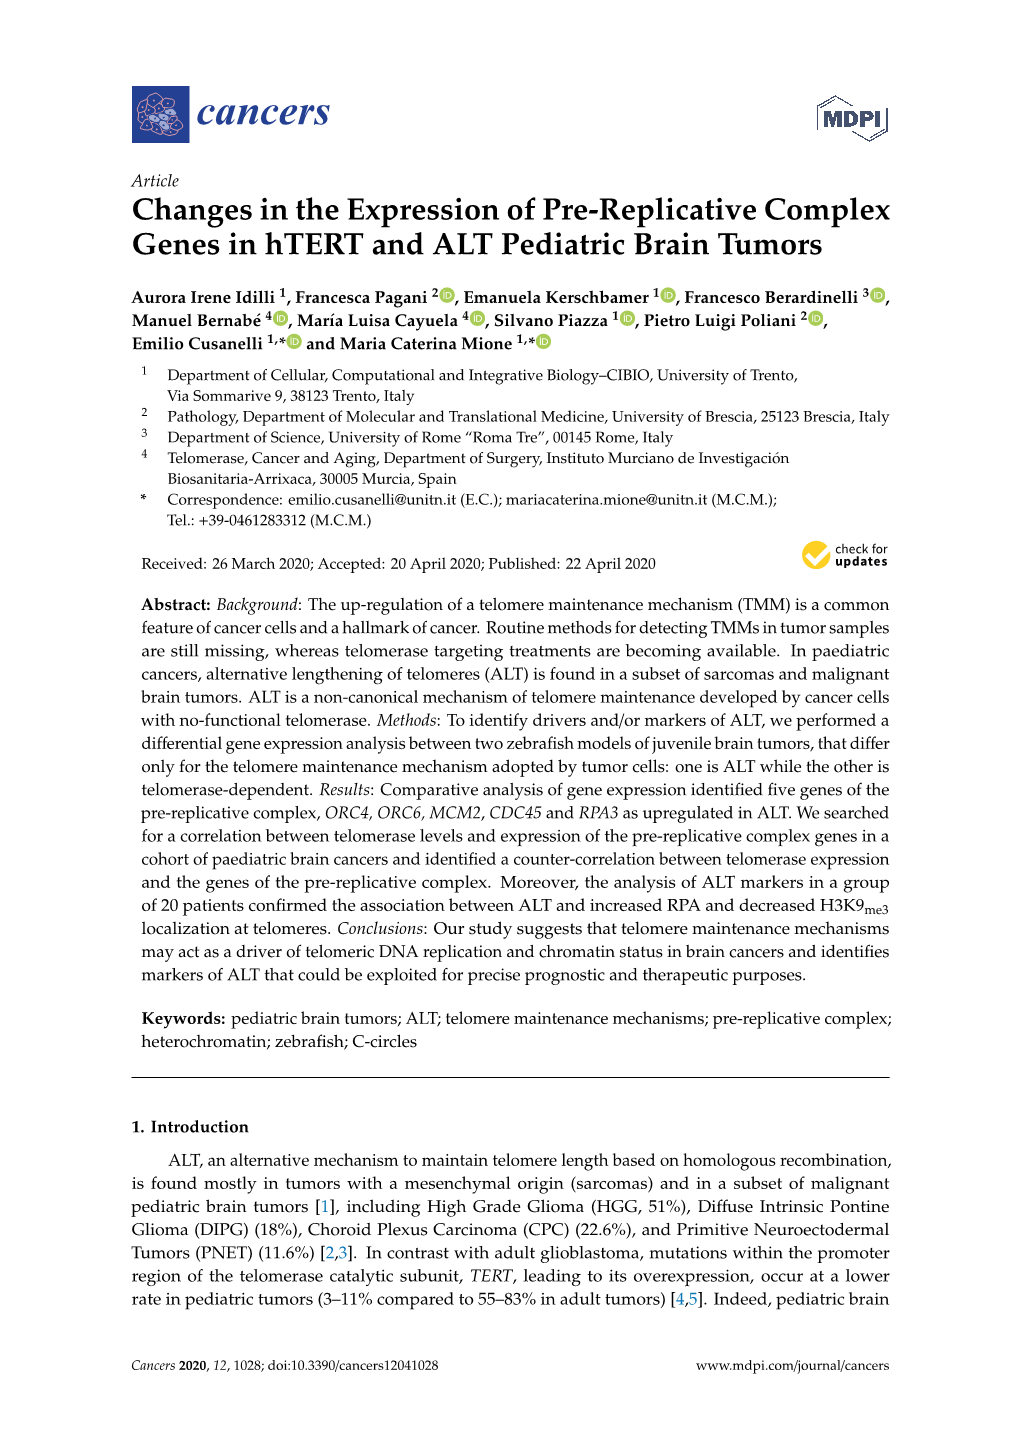 Changes in the Expression of Pre-Replicative Complex Genes in Htert and ALT Pediatric Brain Tumors